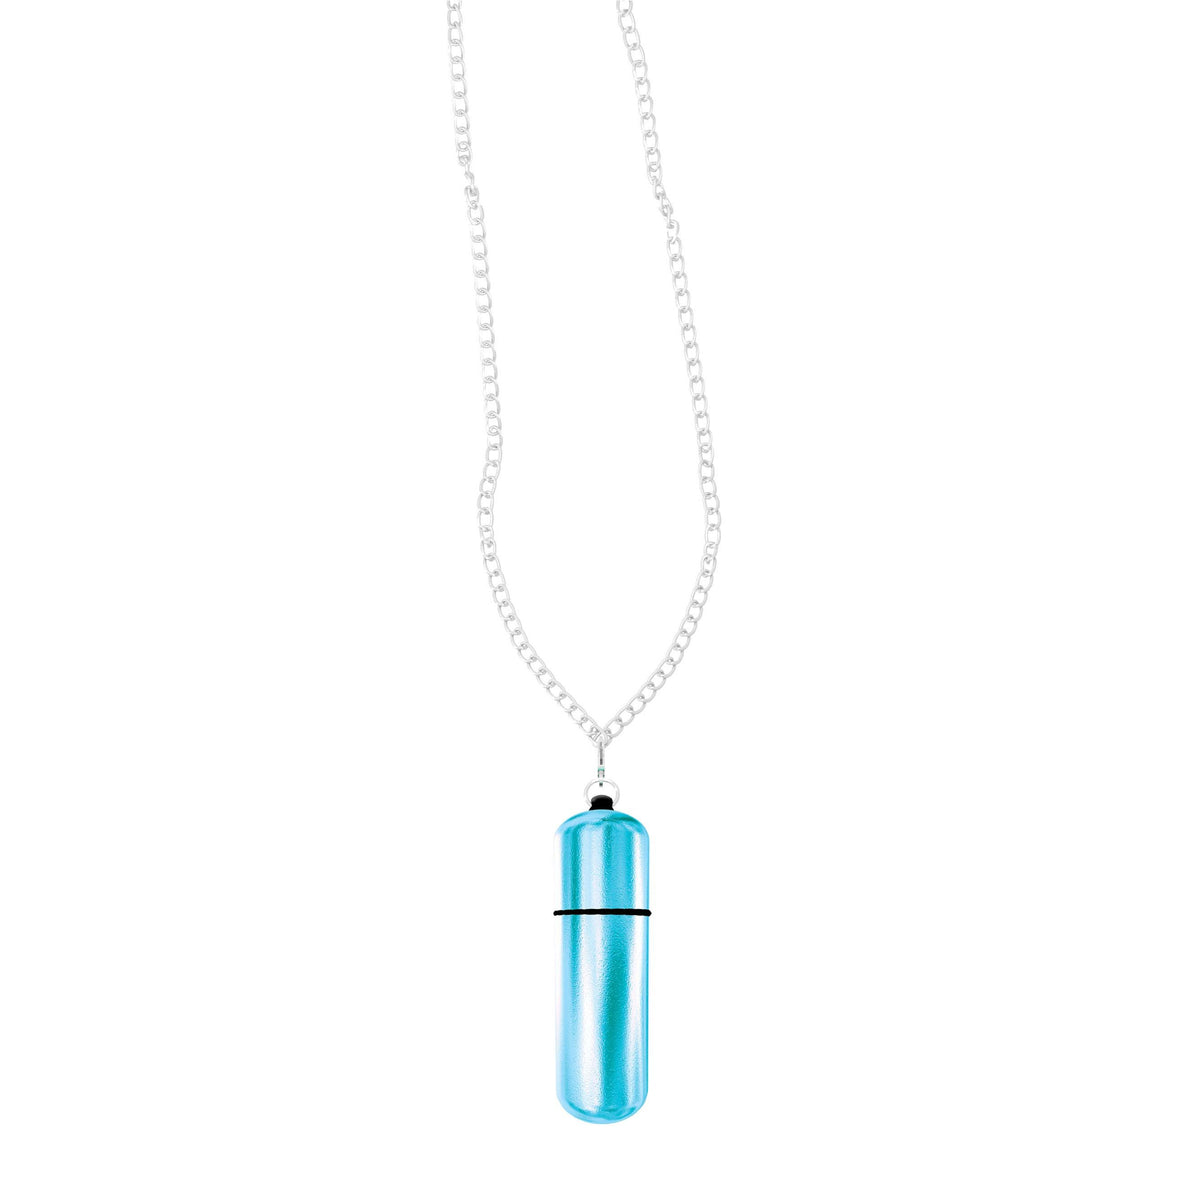 PowerBullet MiVibe Bullet Vibrator Necklace - Battery Operated - Teal